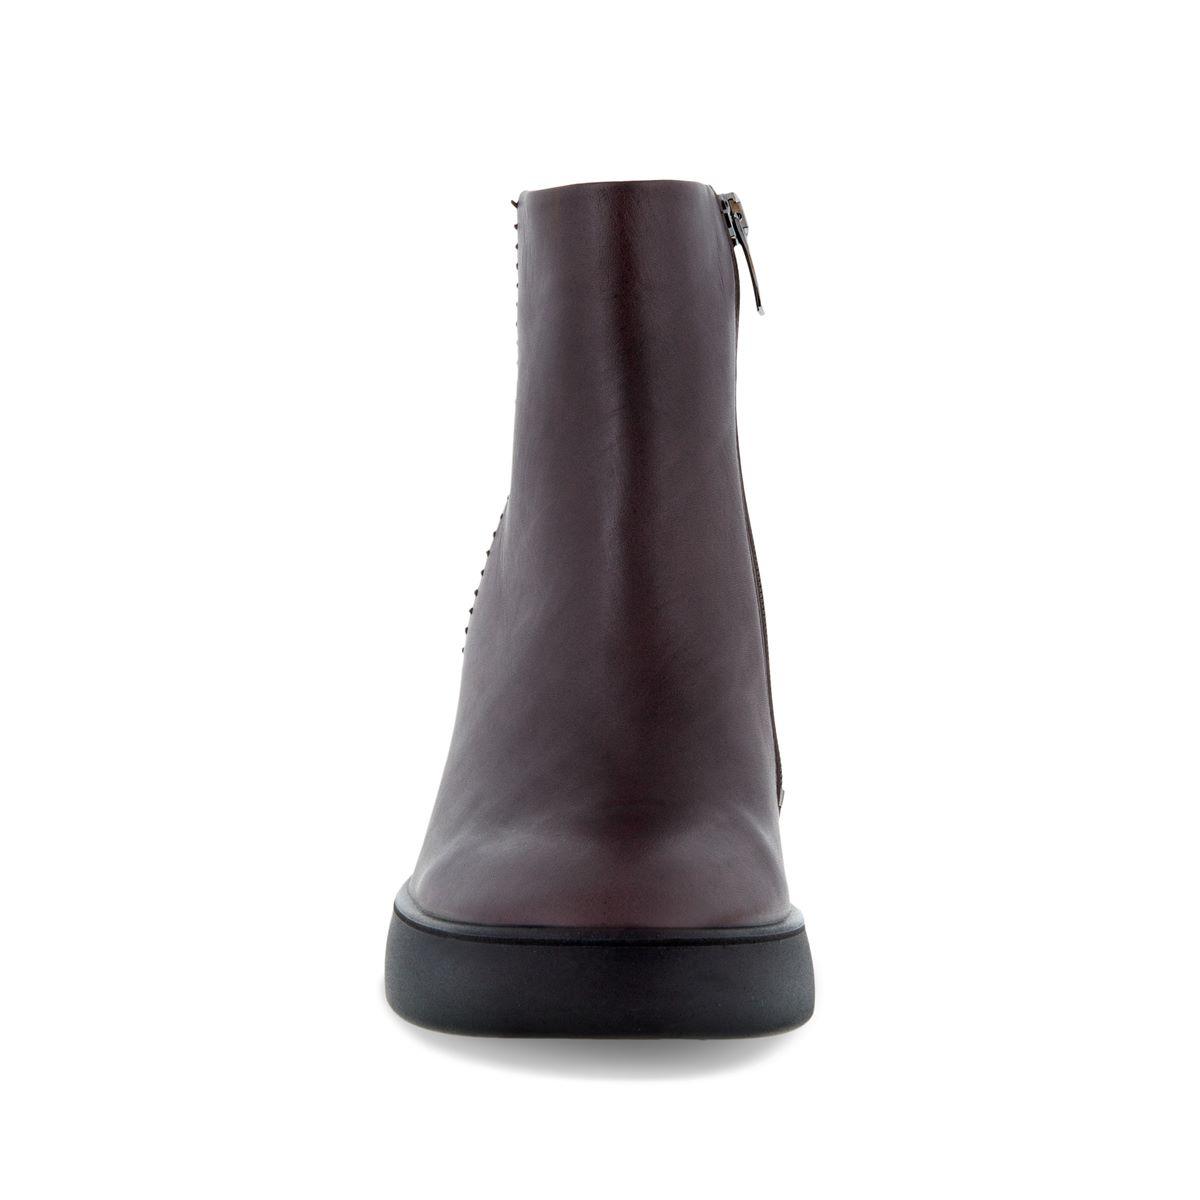 GIÀY BOOT ECCO NỮ SHAPE SCULPTED MOTION 55